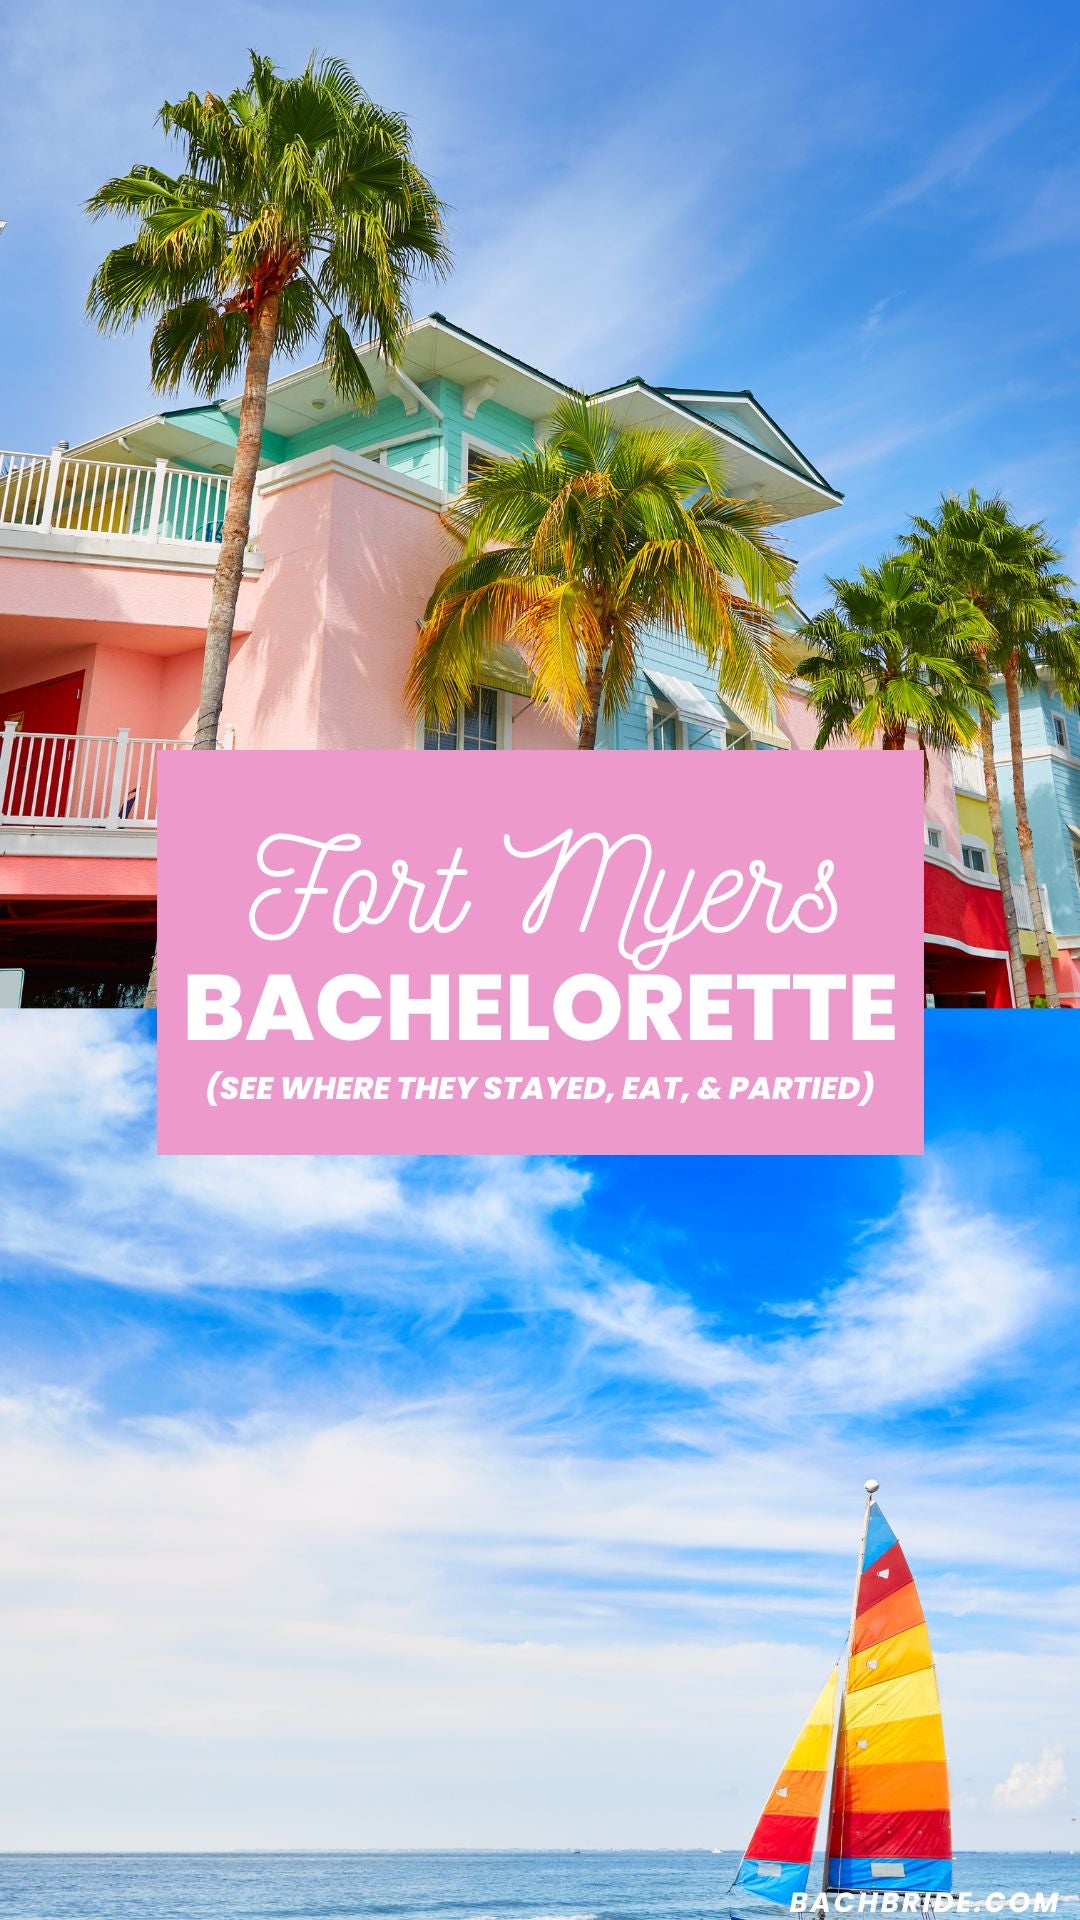 Fort Myers Bachelorette Party